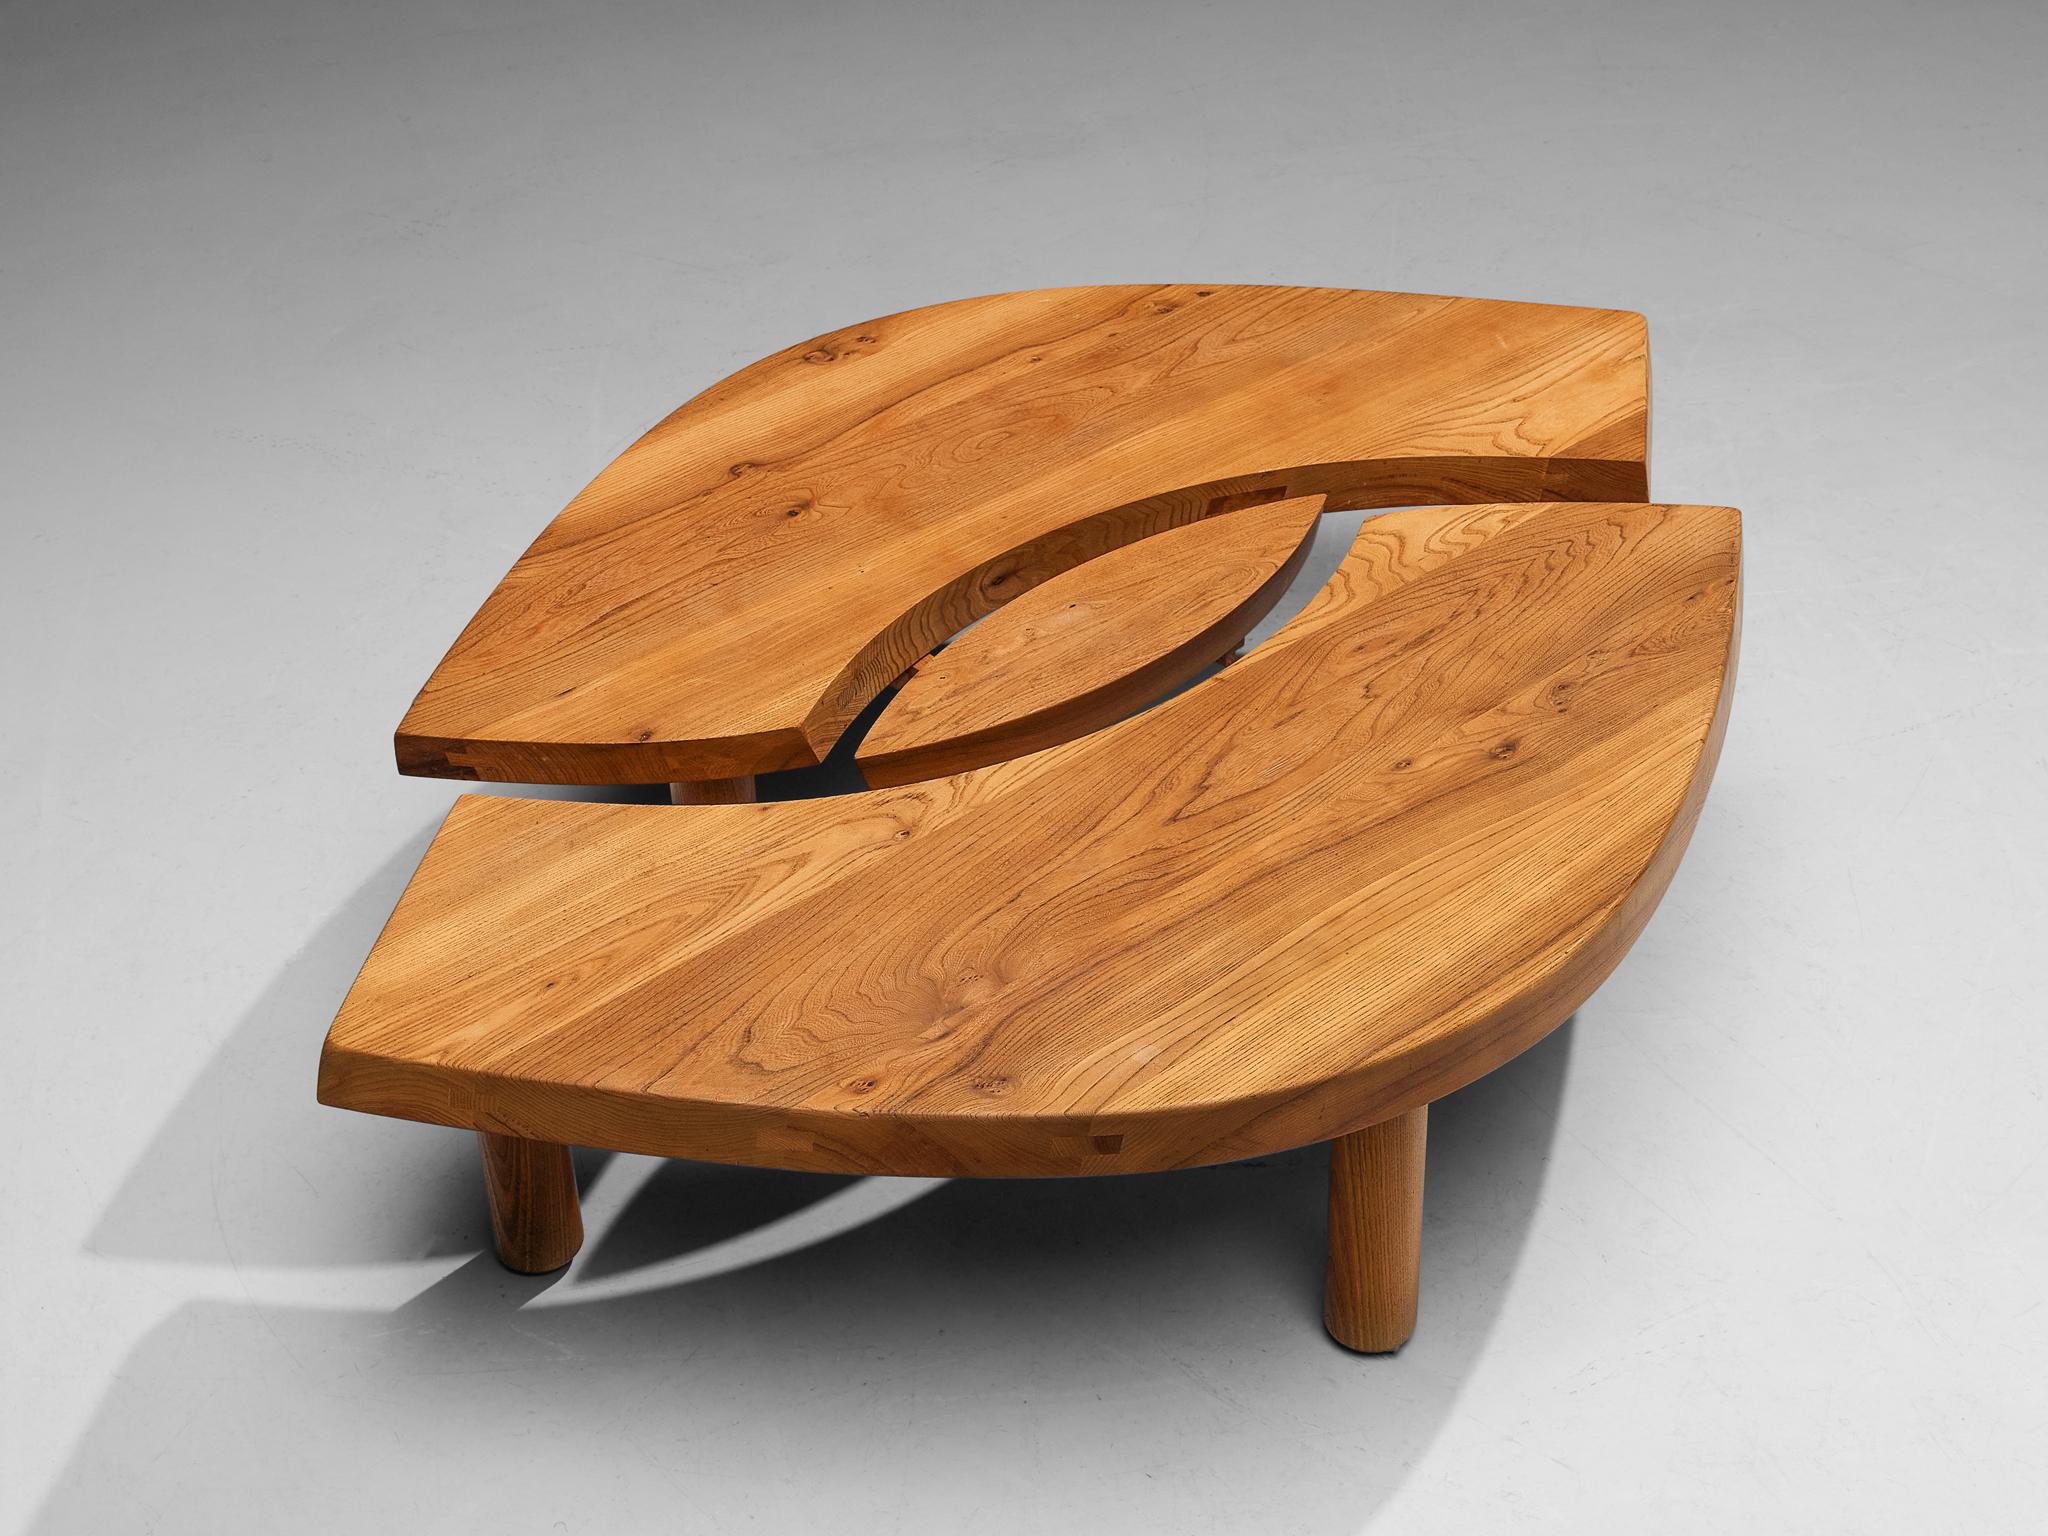 Pierre Chapo, coffee table model T22C, elm, France, circa 1972.

This beautiful eye-shaped cocktail table is designed by the French designer and master woodworker Pierre Chapo (1927-1987). This T22 model, or L'Oeuil ('eye') is completely executed in